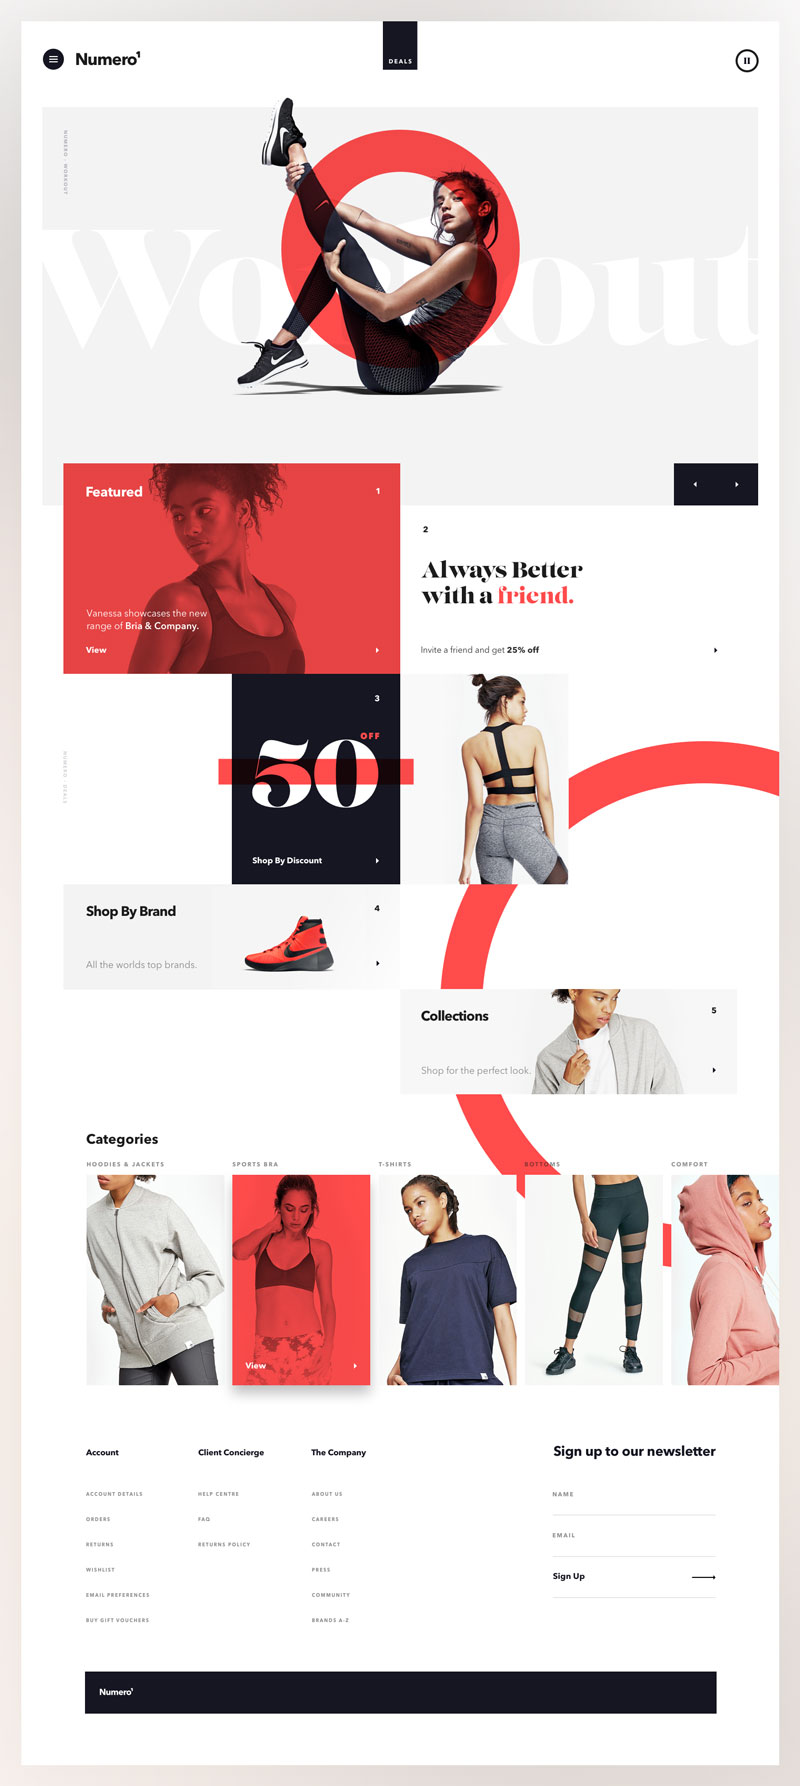 Website Design Inspiration for Products